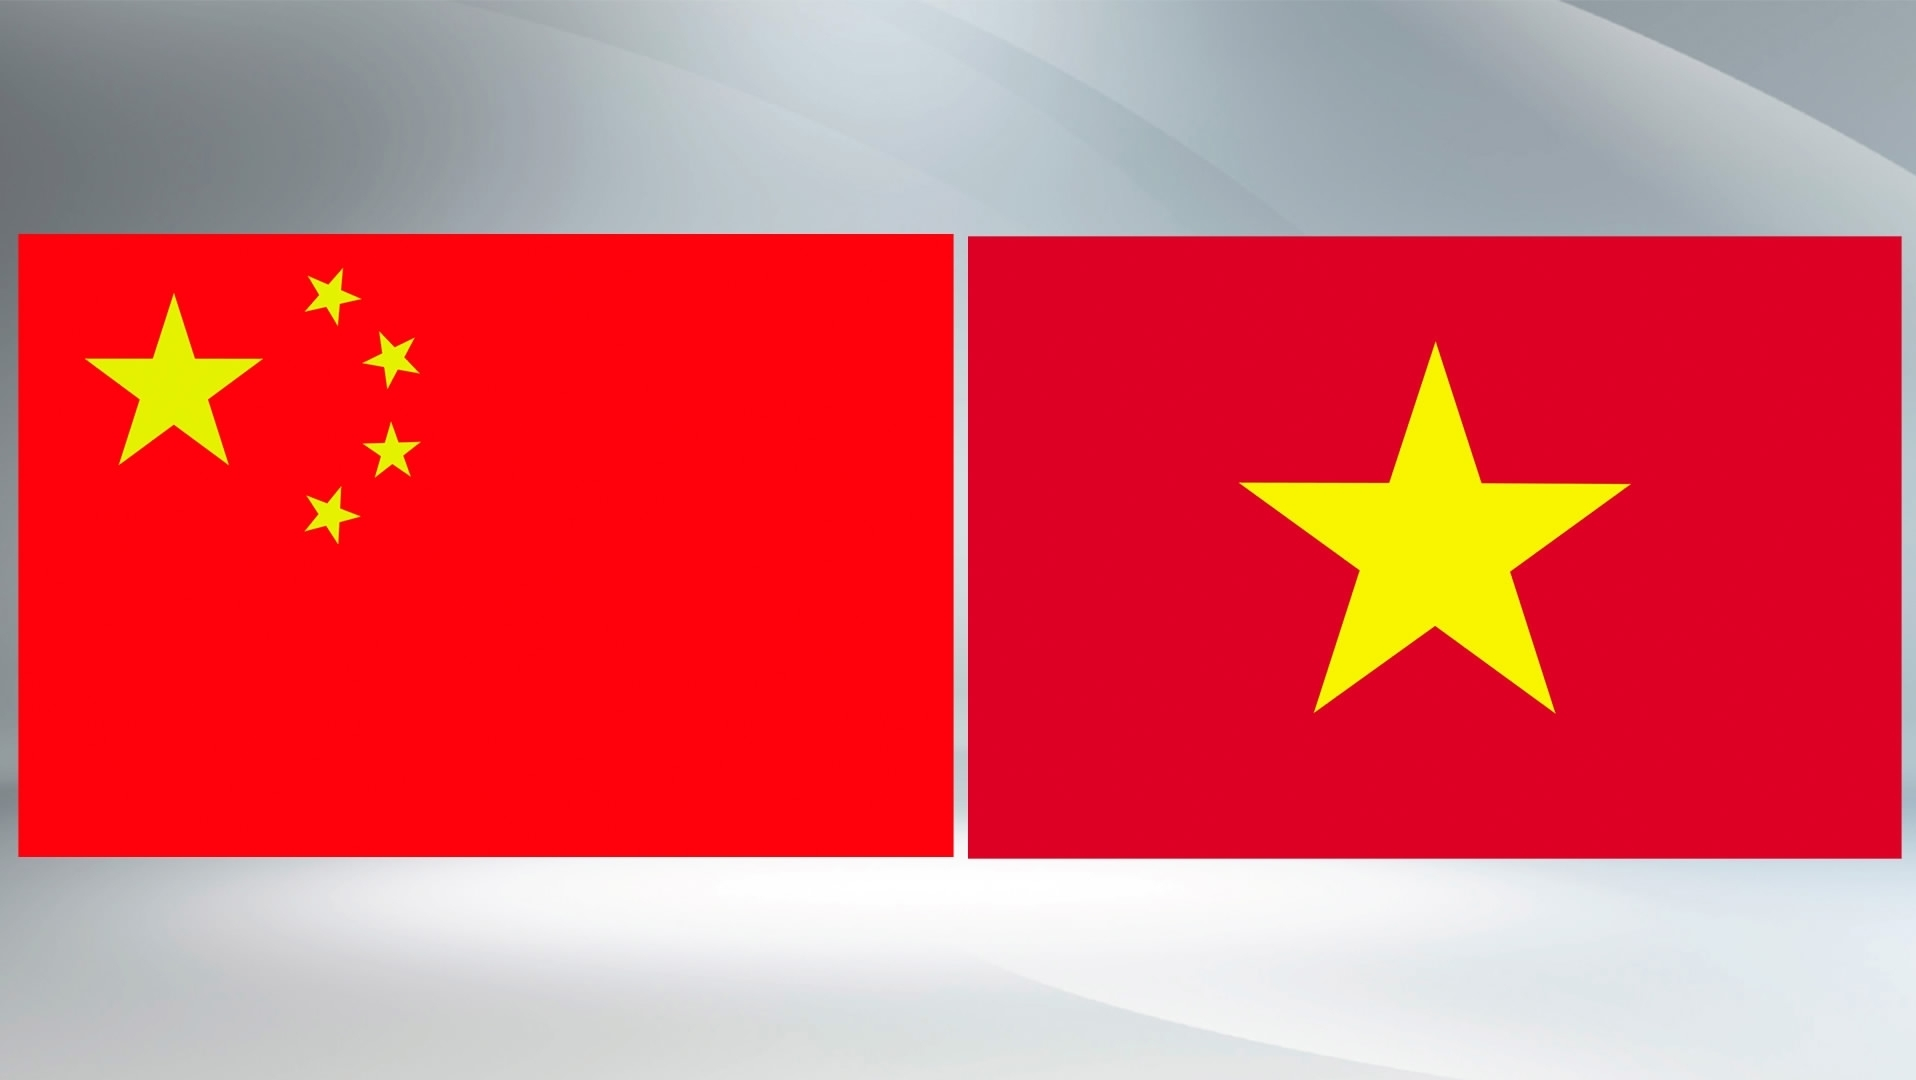 Conducting in-depth researches and exchanges to deepen Vietnam-China relations